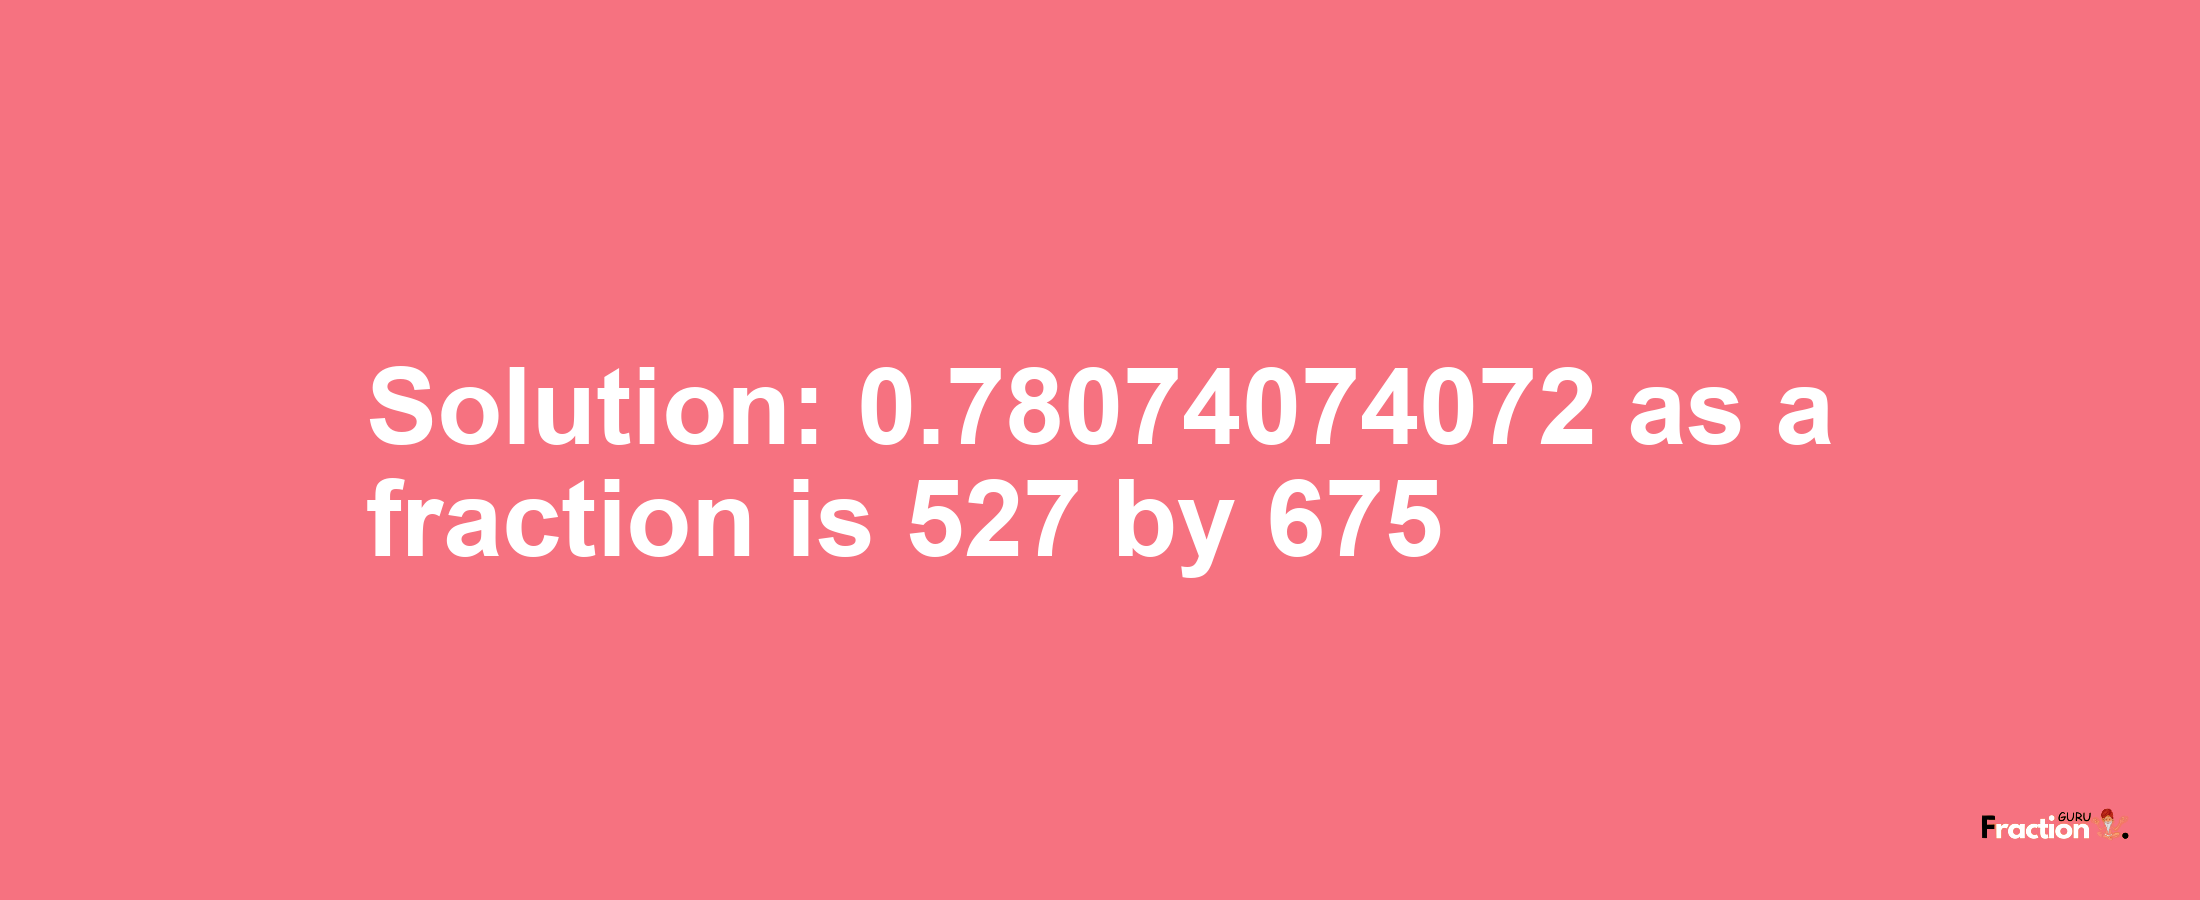 Solution:0.78074074072 as a fraction is 527/675